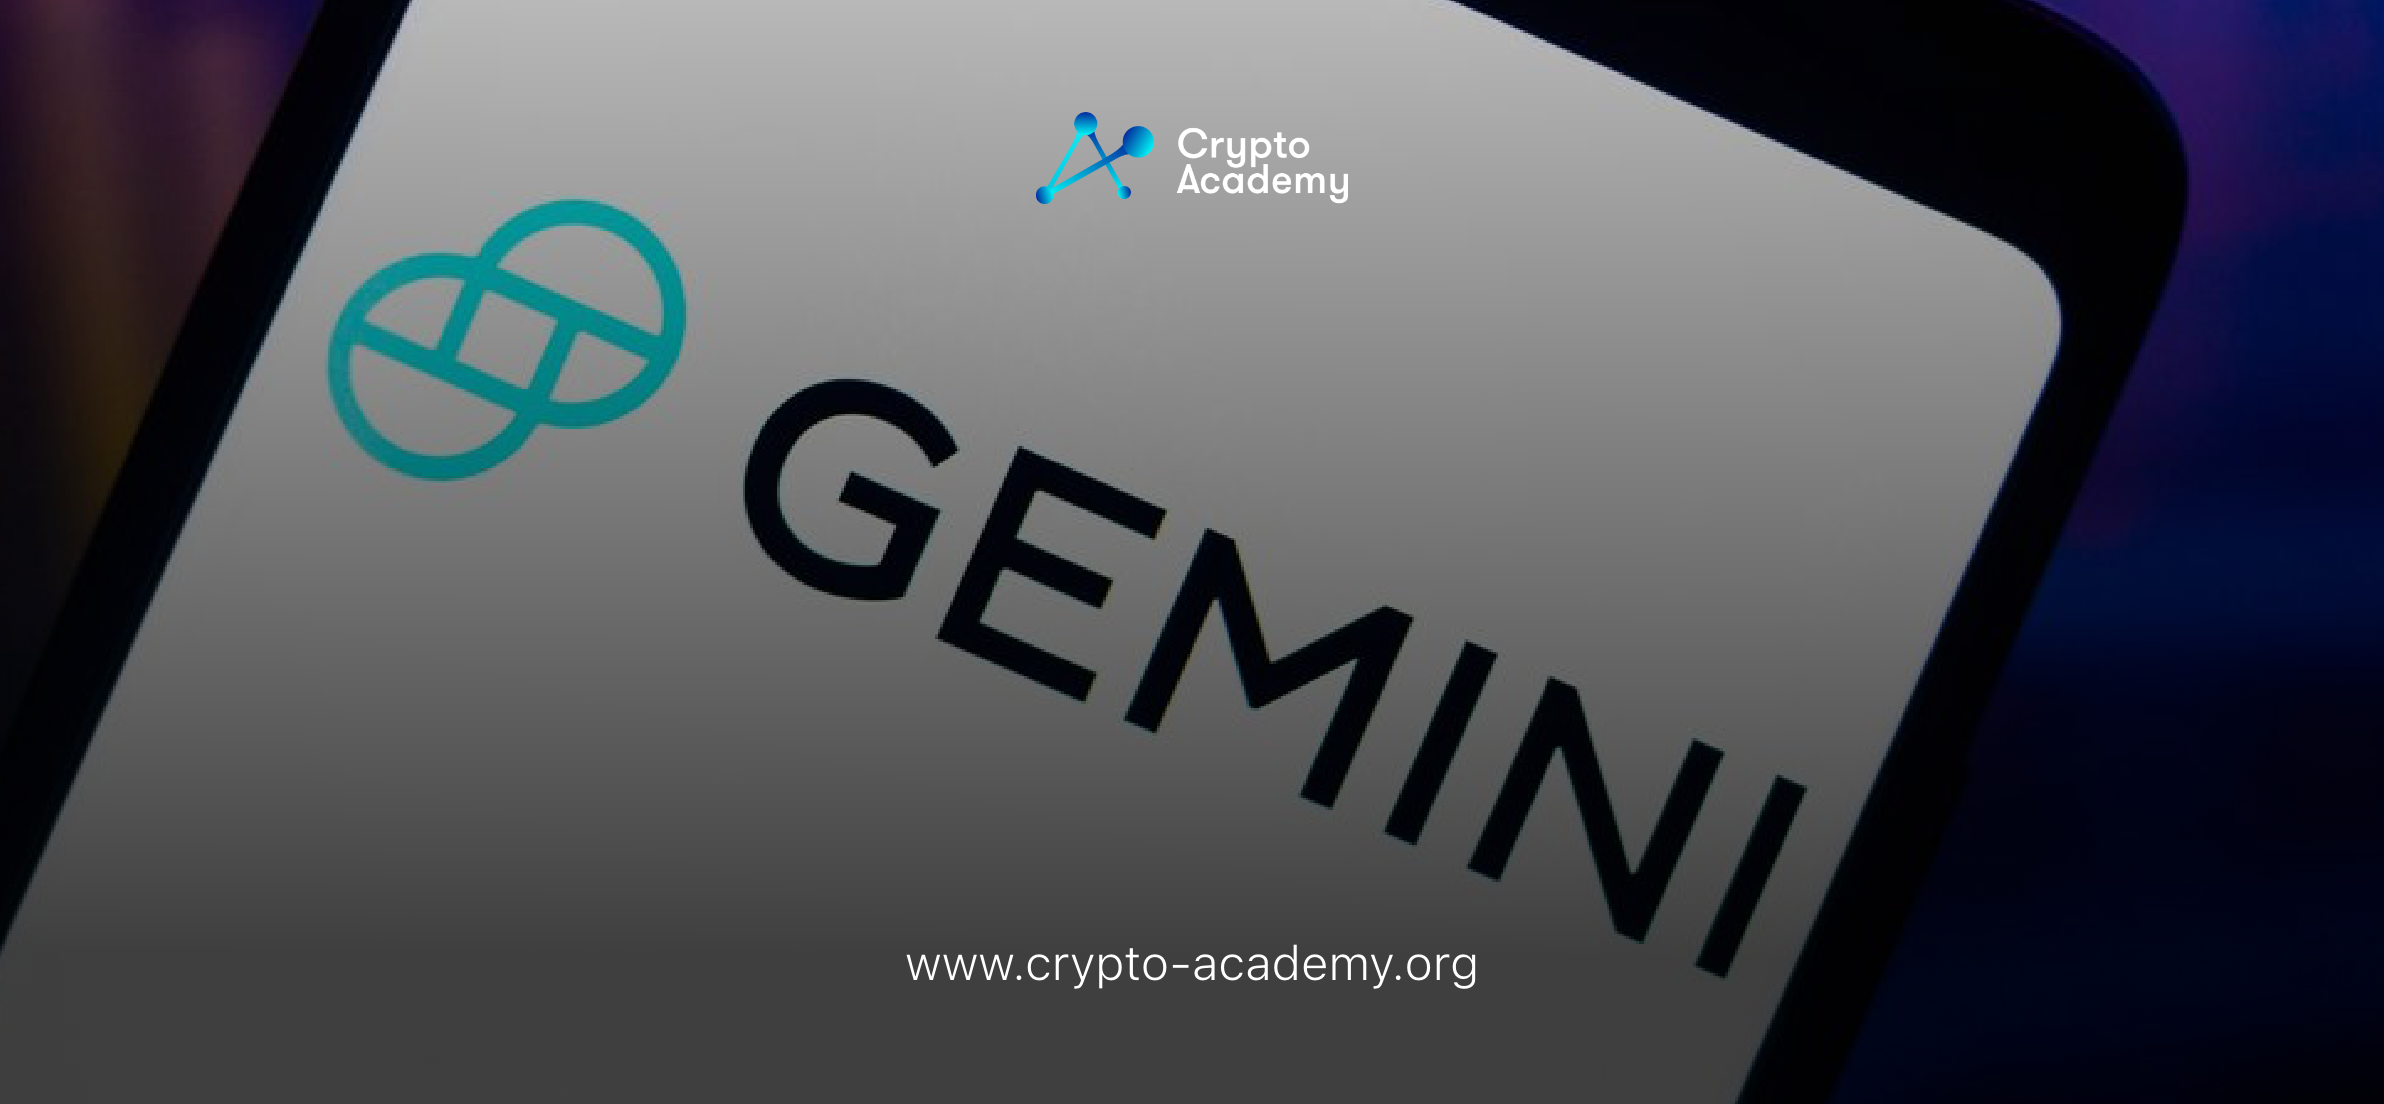 Gemini Earn Users Could Receive Just 60% of Their Crypto Funds